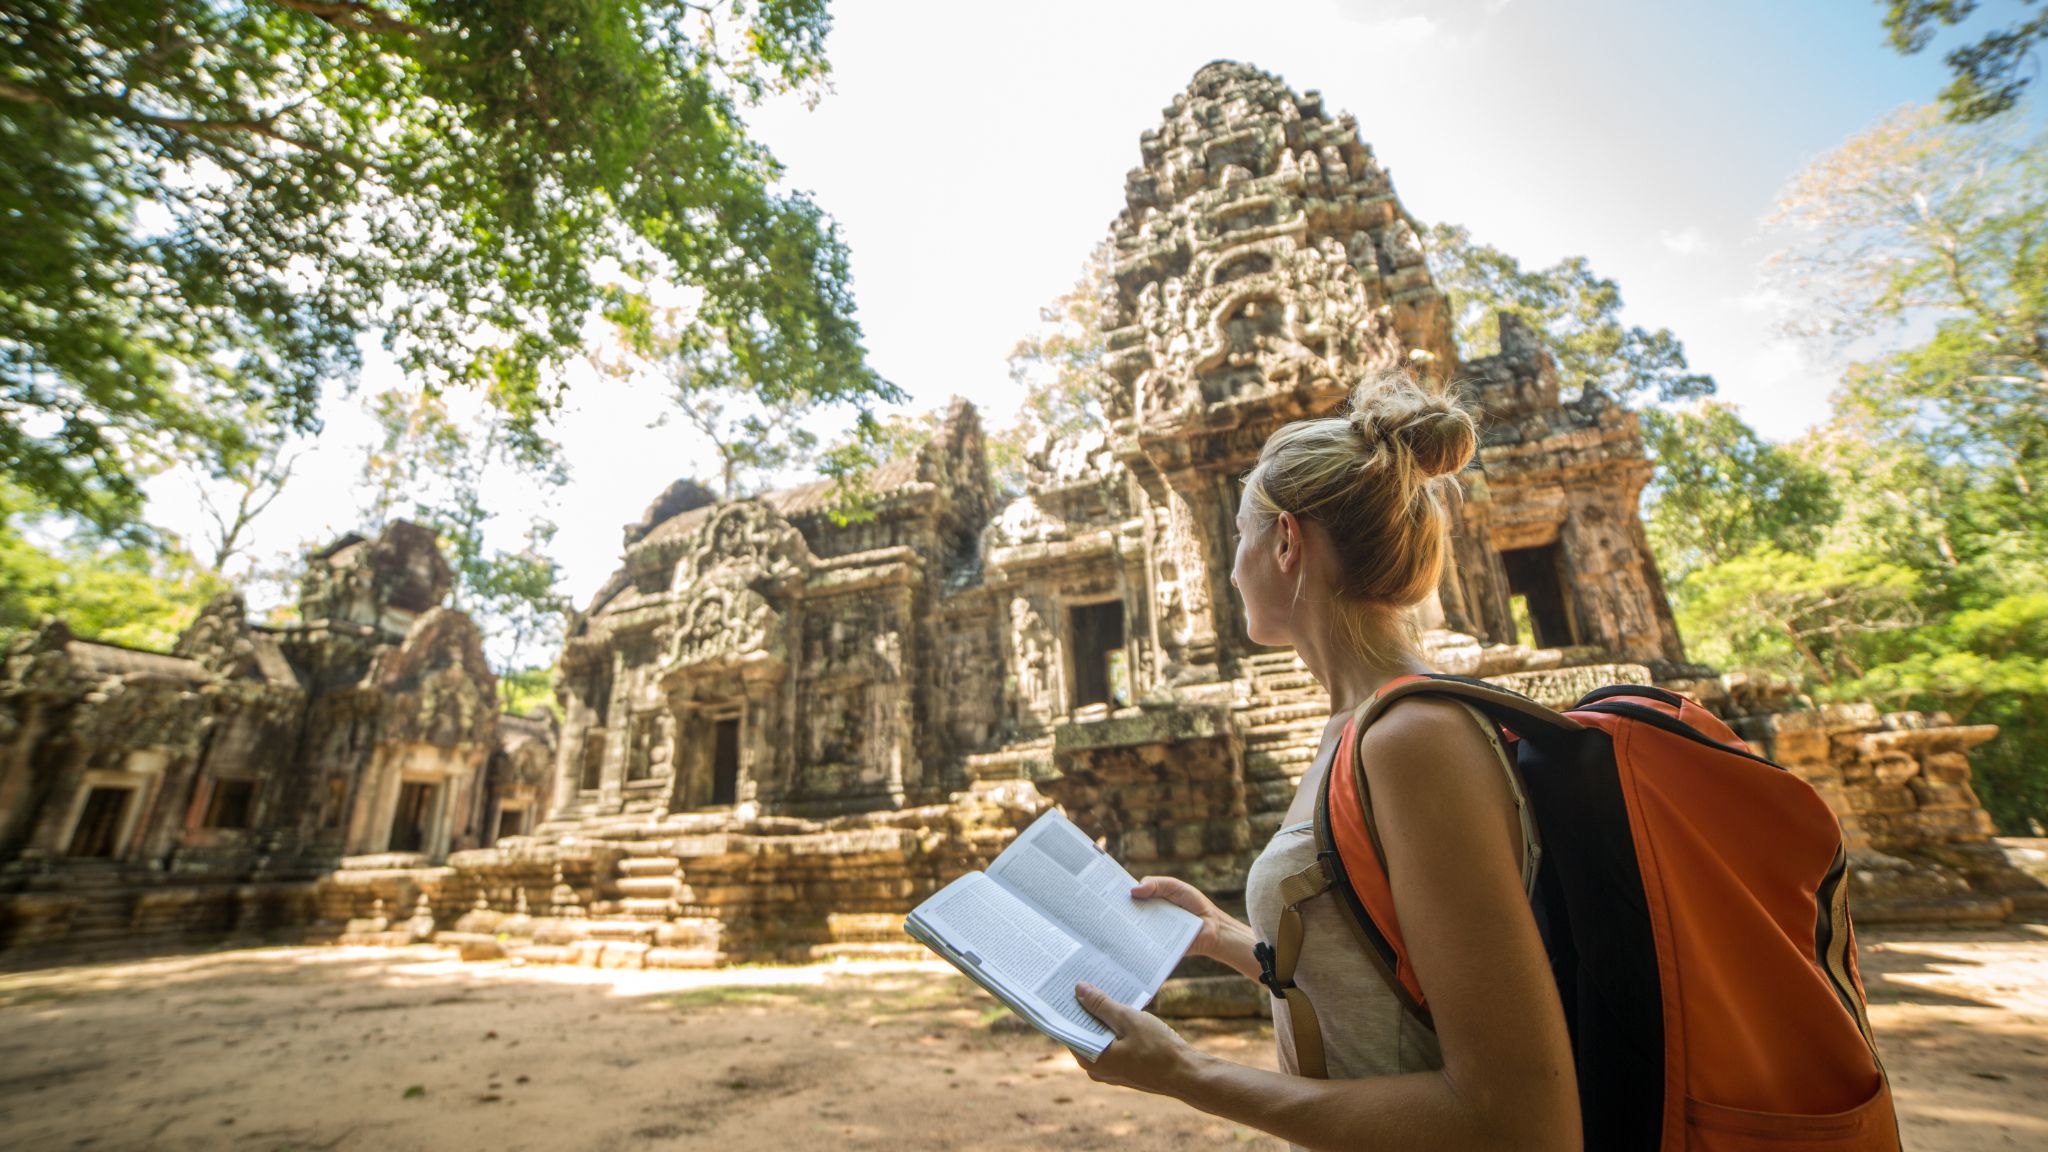 Day 3 Explore The Beautiful Nature Of Siem Reap